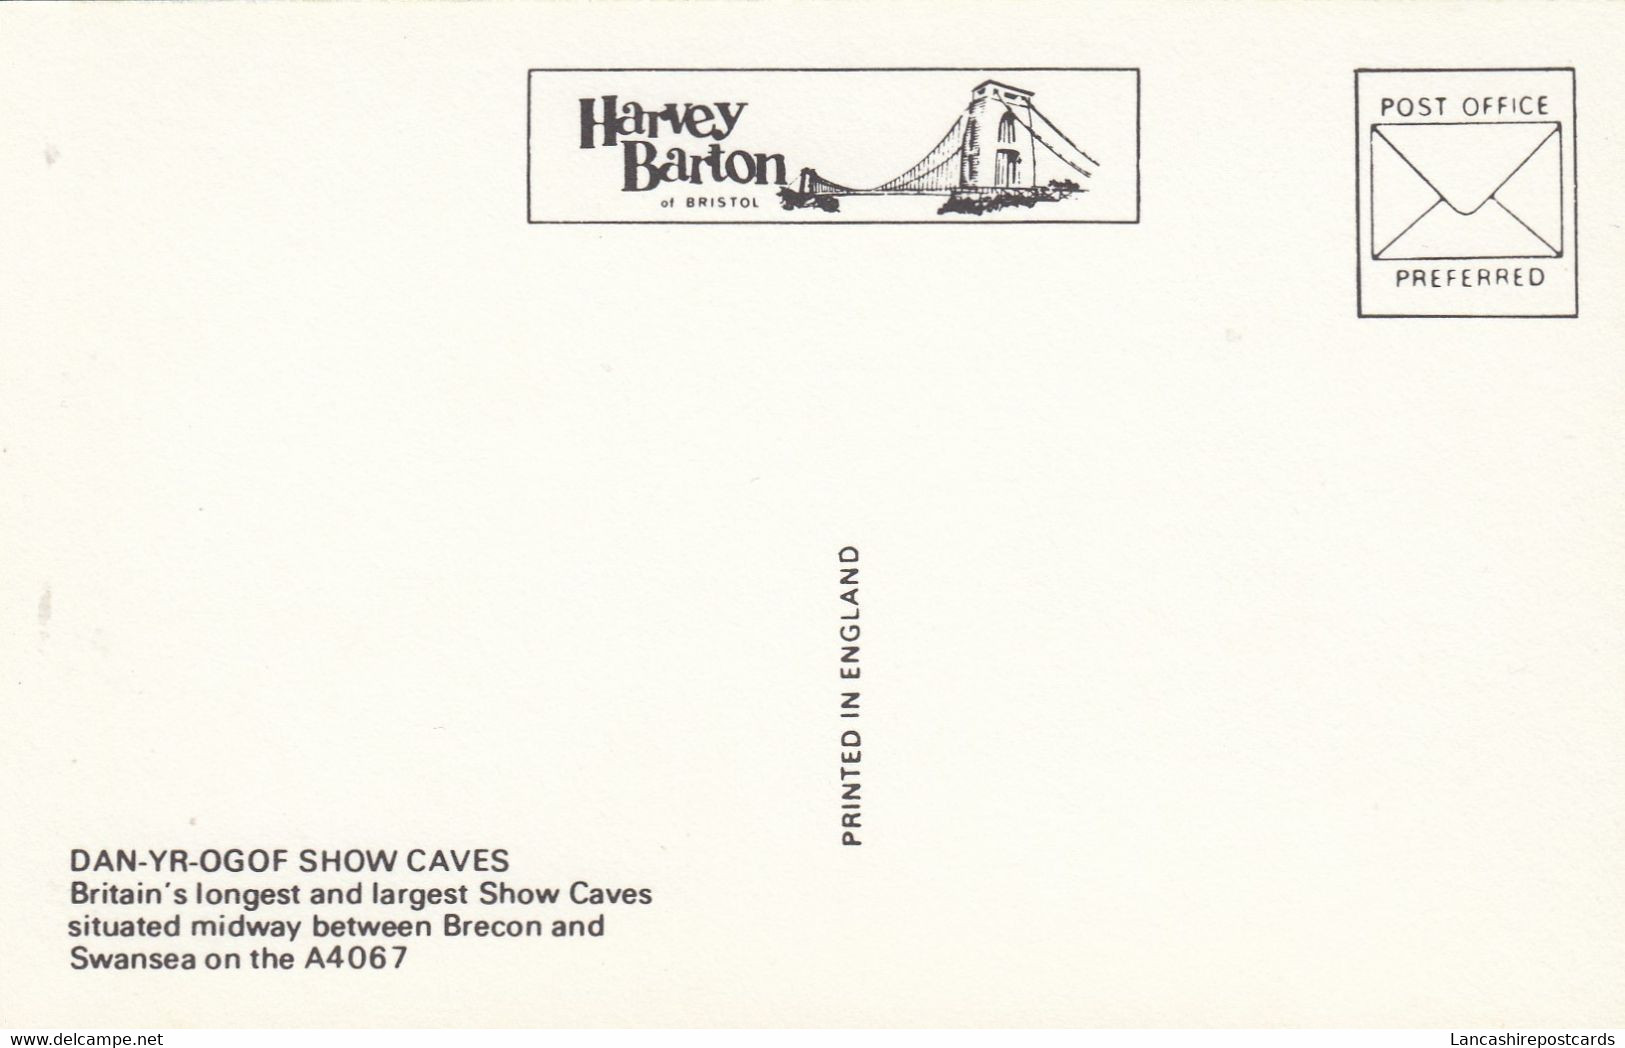 Postcard Flitch Of Bacon Dan Yr Ogof National Show Caves Of Wales Brecon Beacons My Ref B14503 - Breconshire